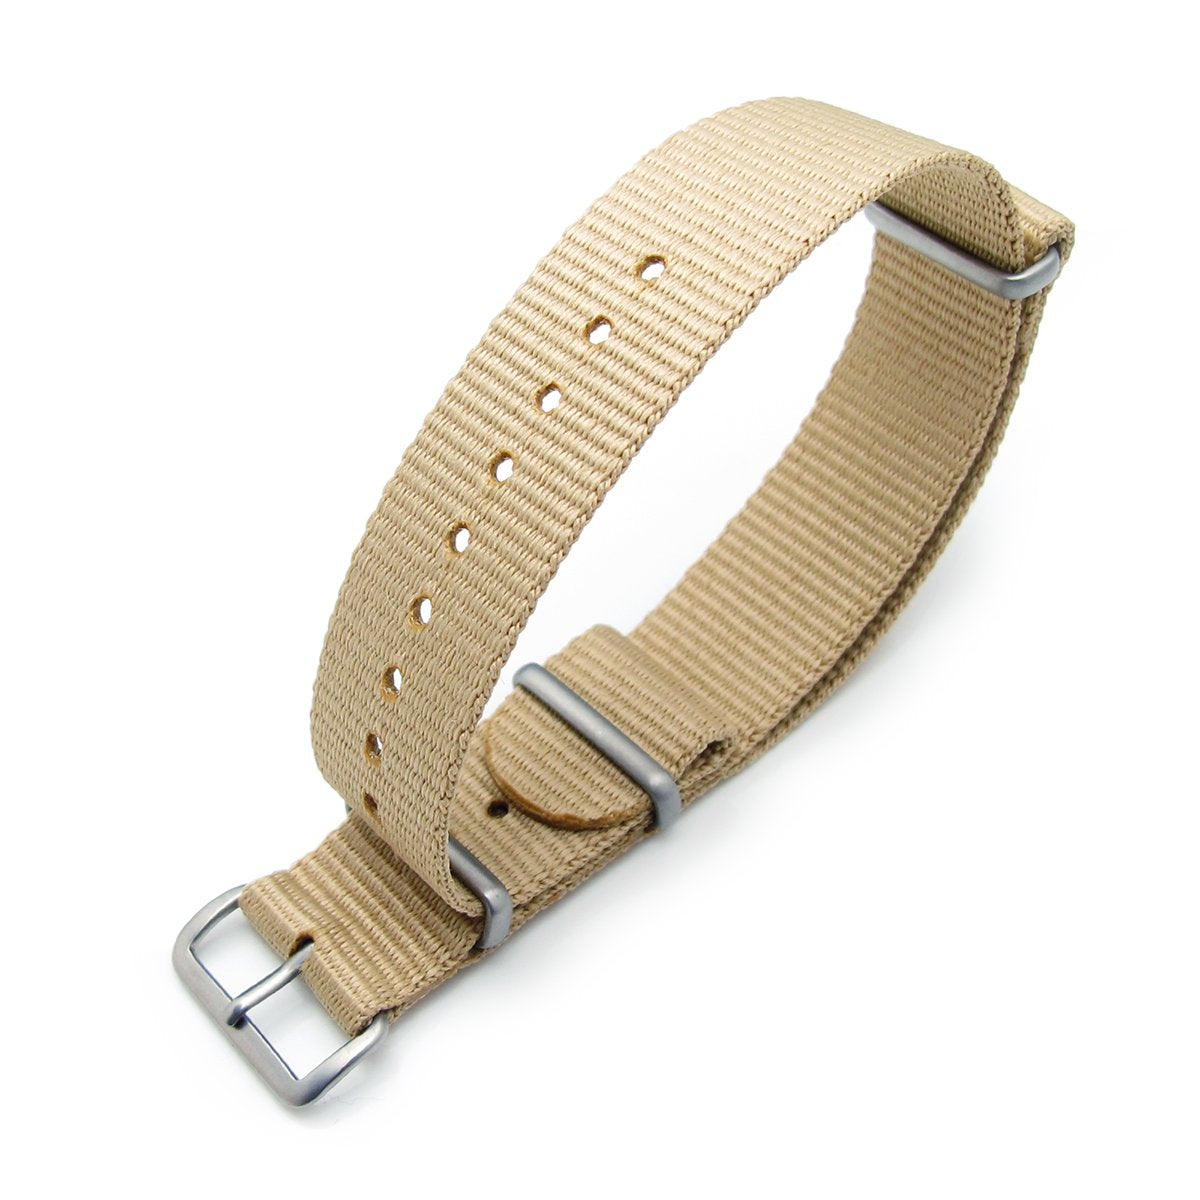 MiLTAT 20mm G10 military watch strap ballistic nylon armband Brushed Sand Strapcode Watch Bands